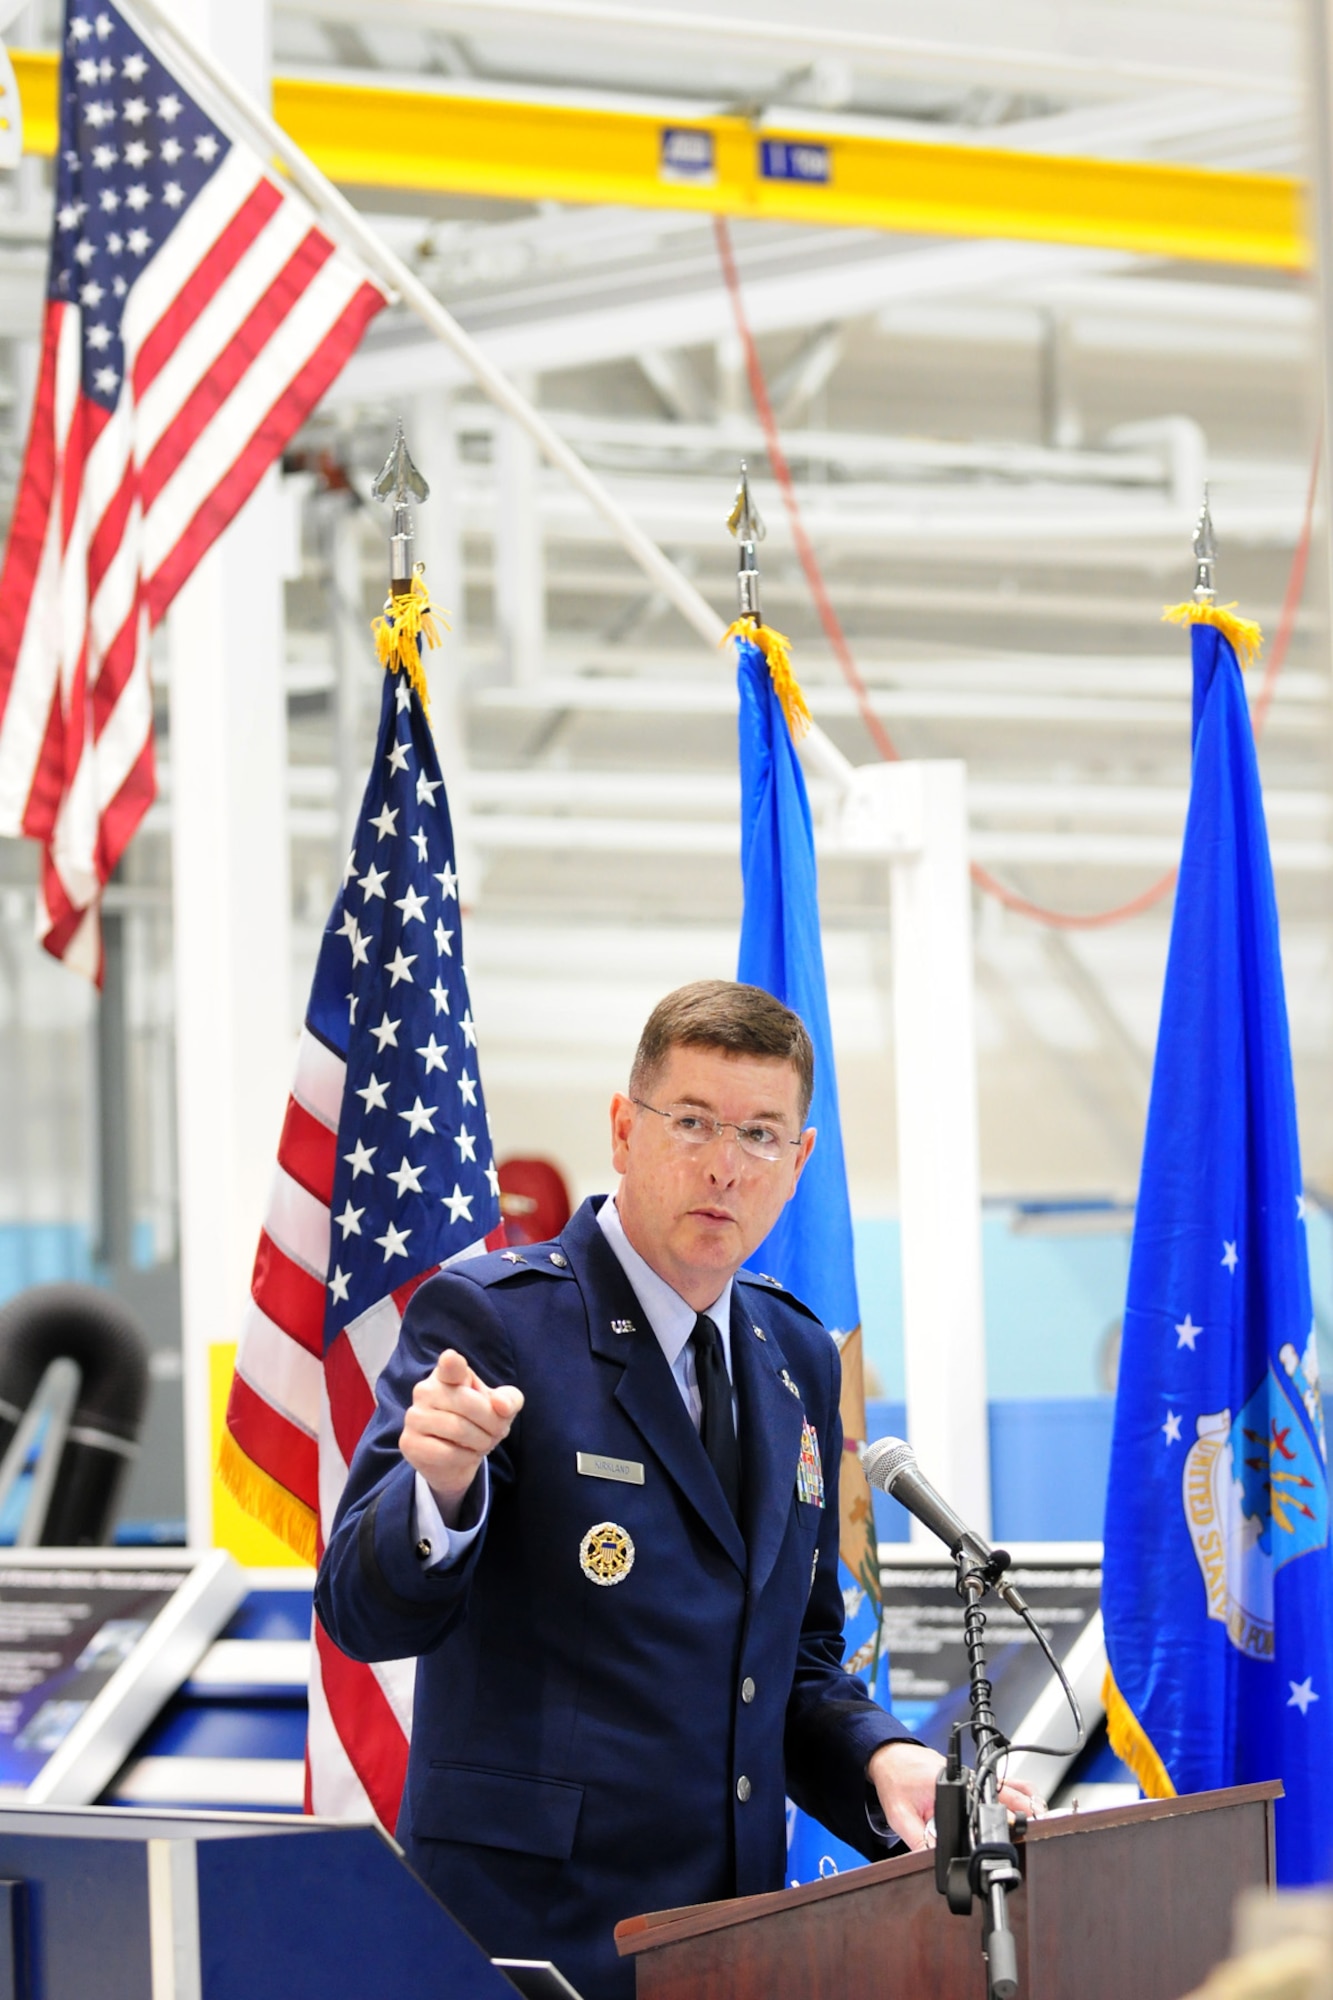 Brig. Gen. Donald Kirkland, the new Oklahoma City Air Logistics Complex commander, speaks to the Tinker workforce after assuming command of the complex in a Sept. 7 ceremony. (Air Force photo by Kelly White)